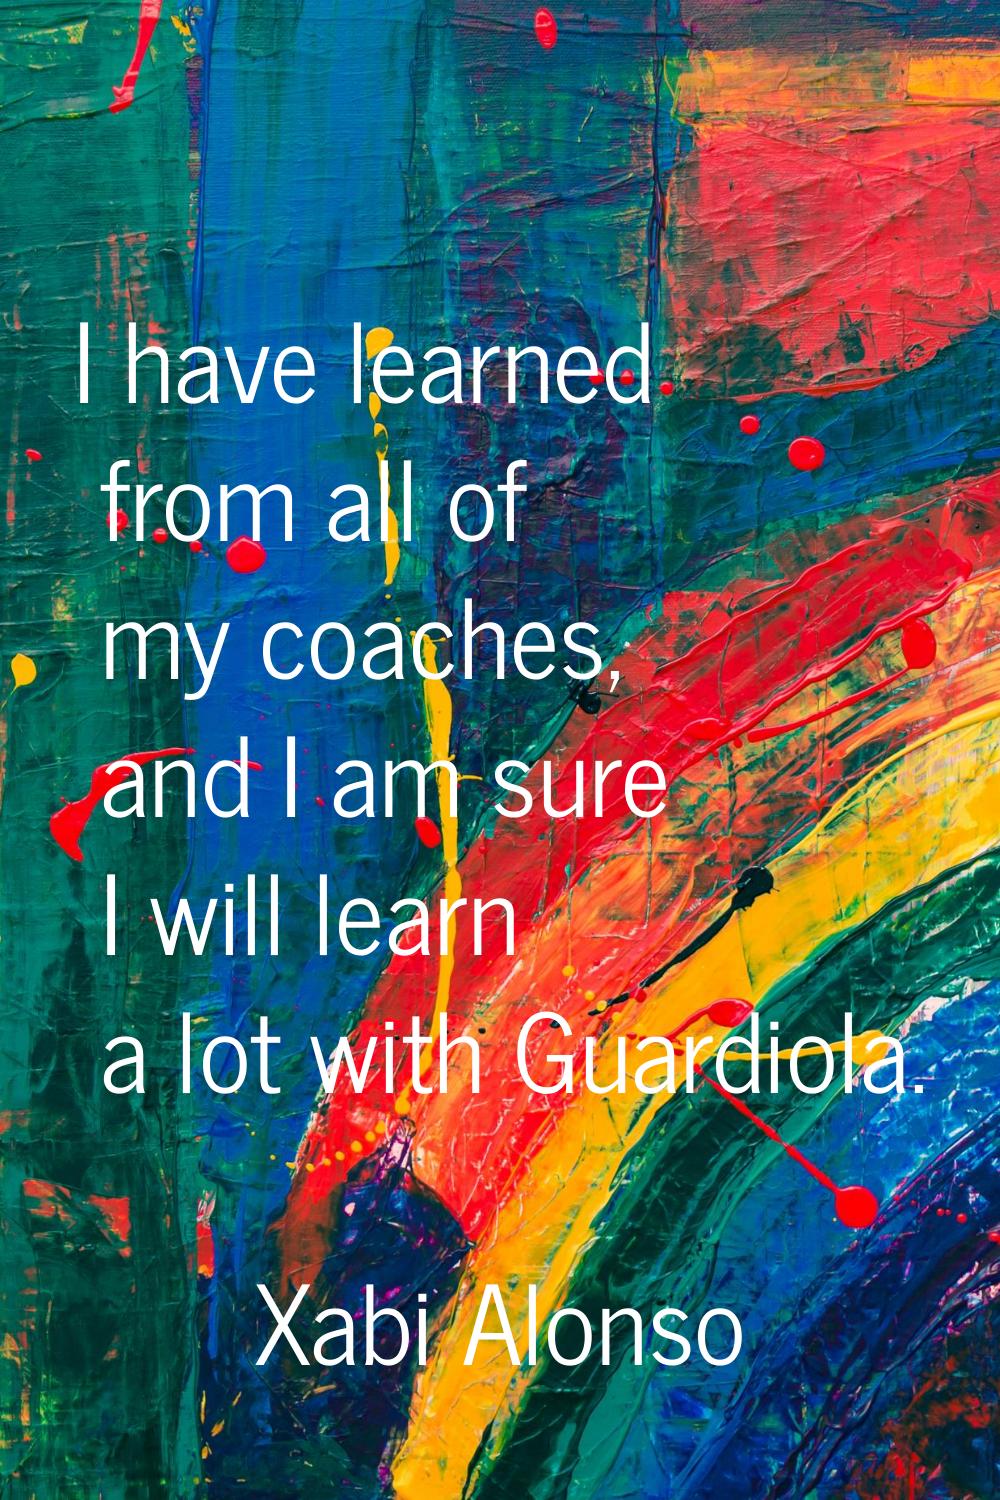 I have learned from all of my coaches, and I am sure I will learn a lot with Guardiola.